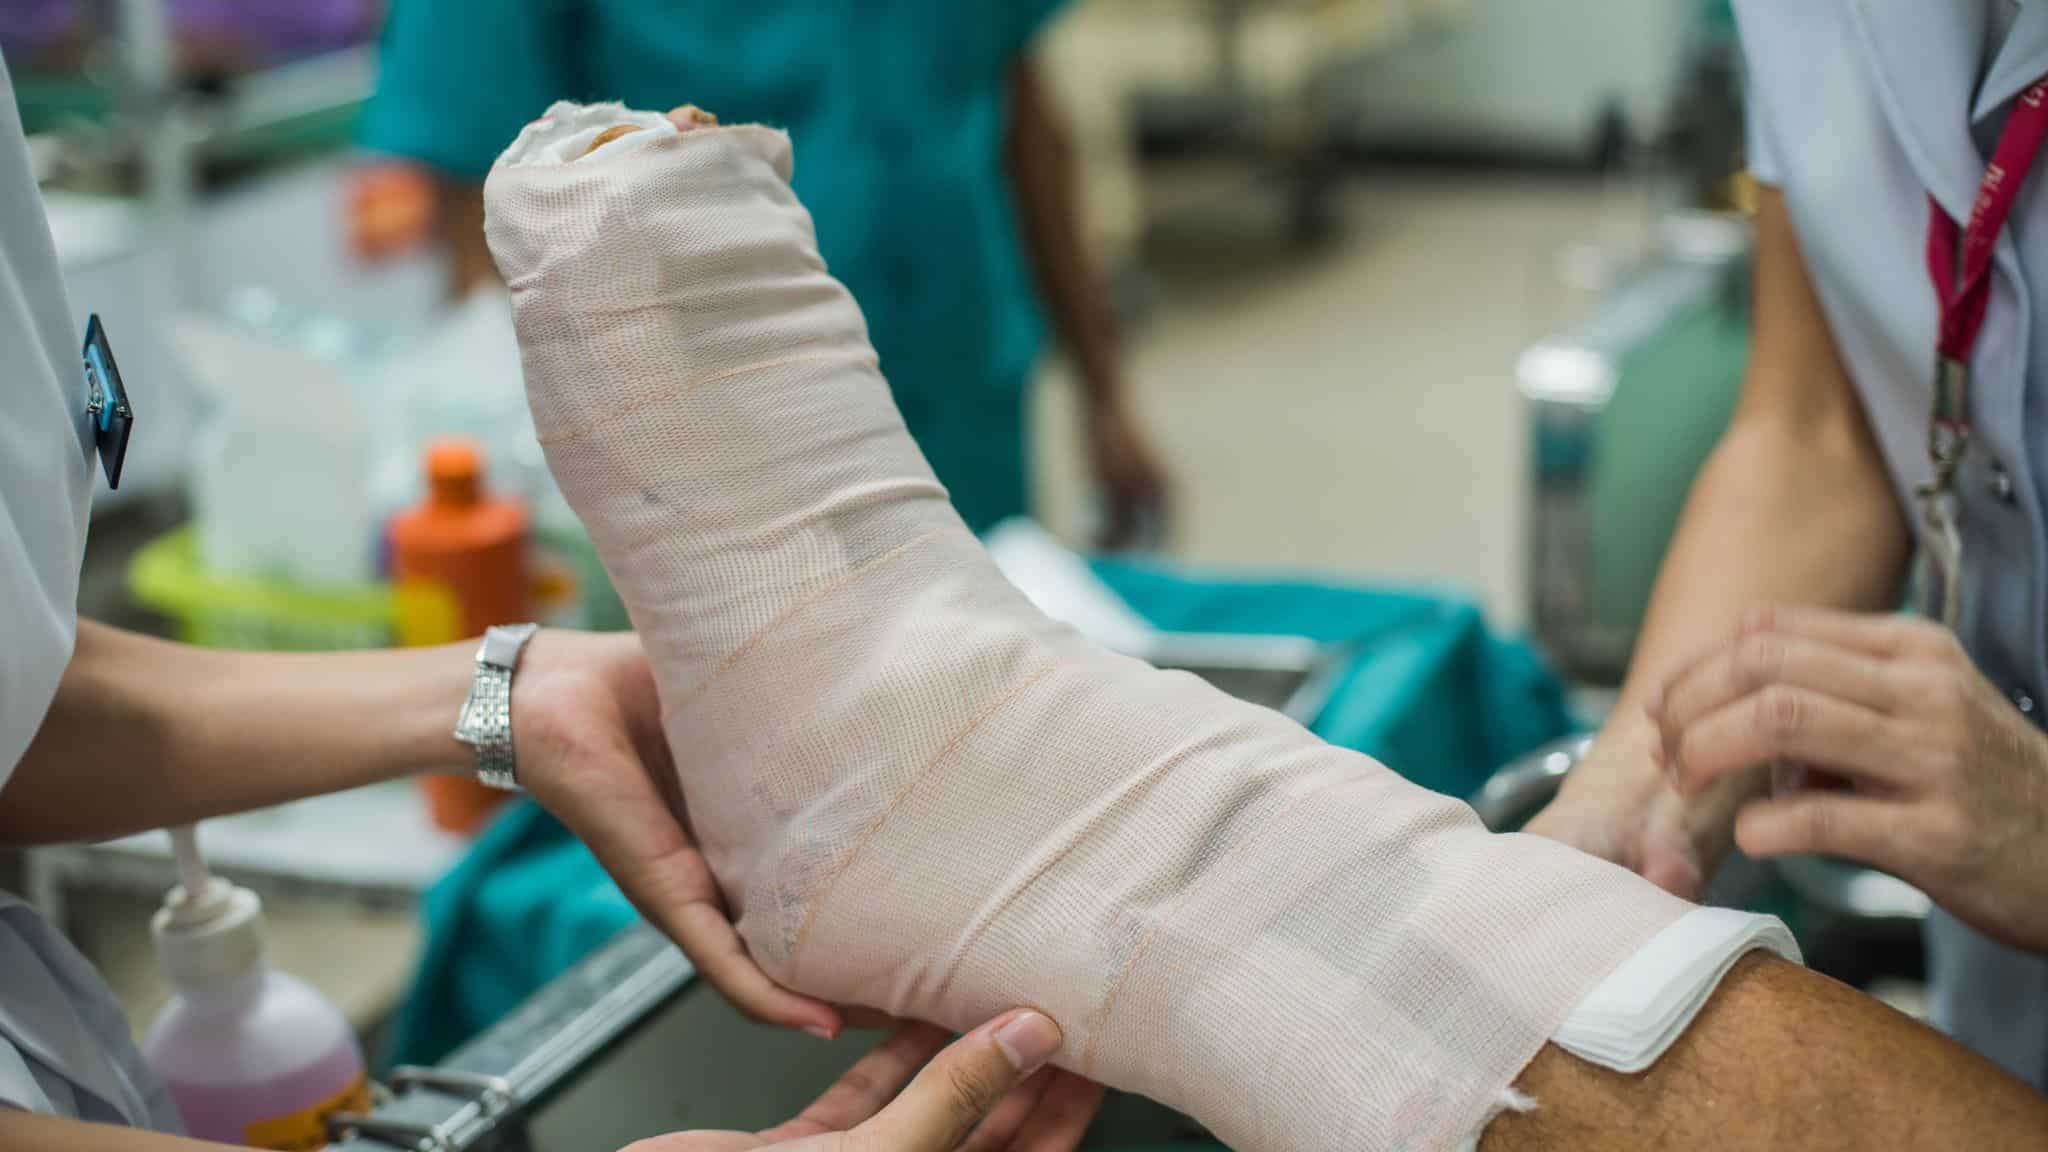 Patient with broken leg and splinted for treatment in the hospital.